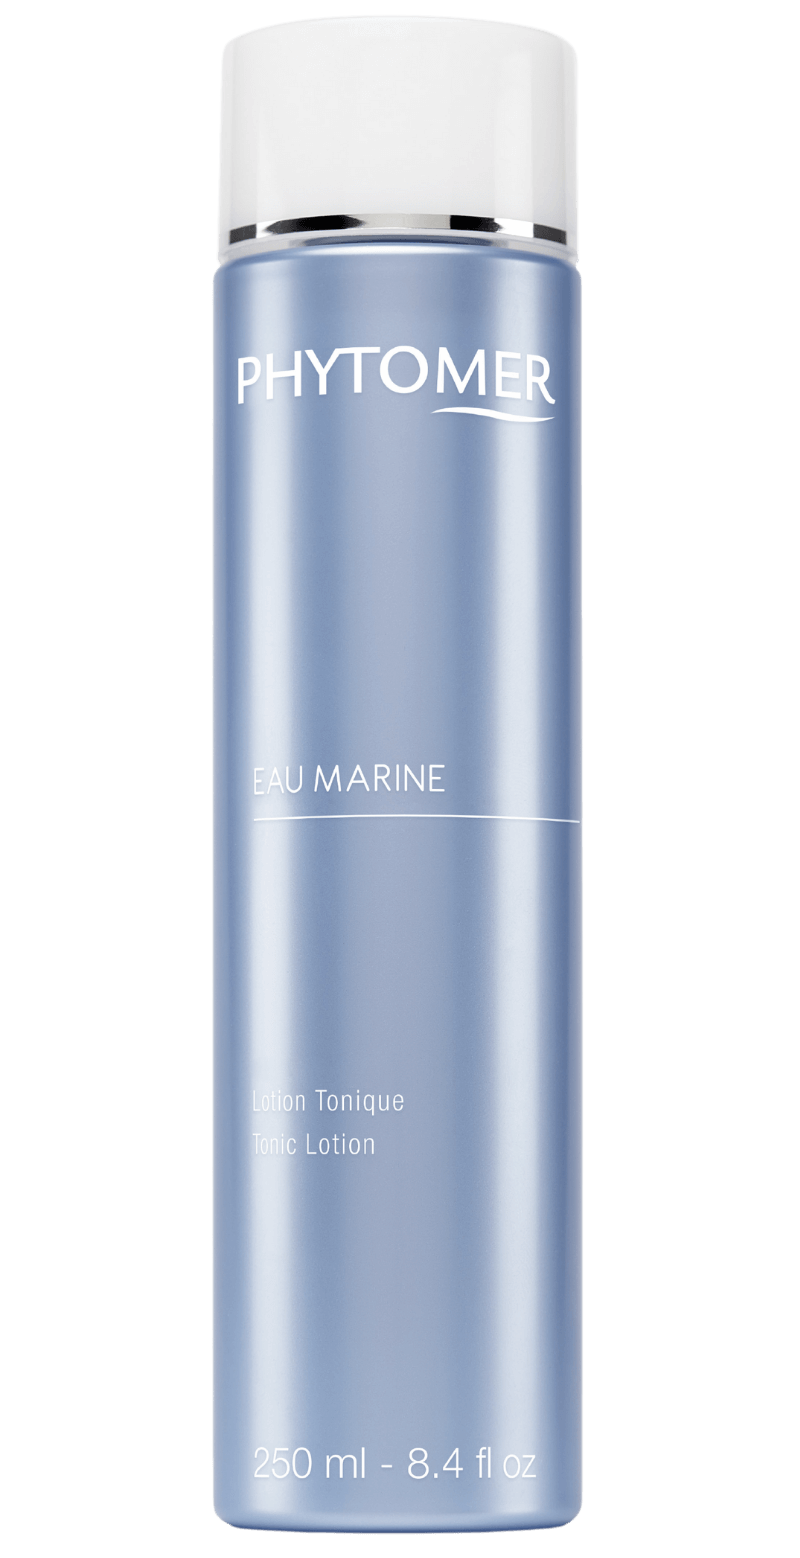 's Phytomer EAU MARINE Alcohol-Free Tonic Lotion - Bellini's Skin and Parfumerie 